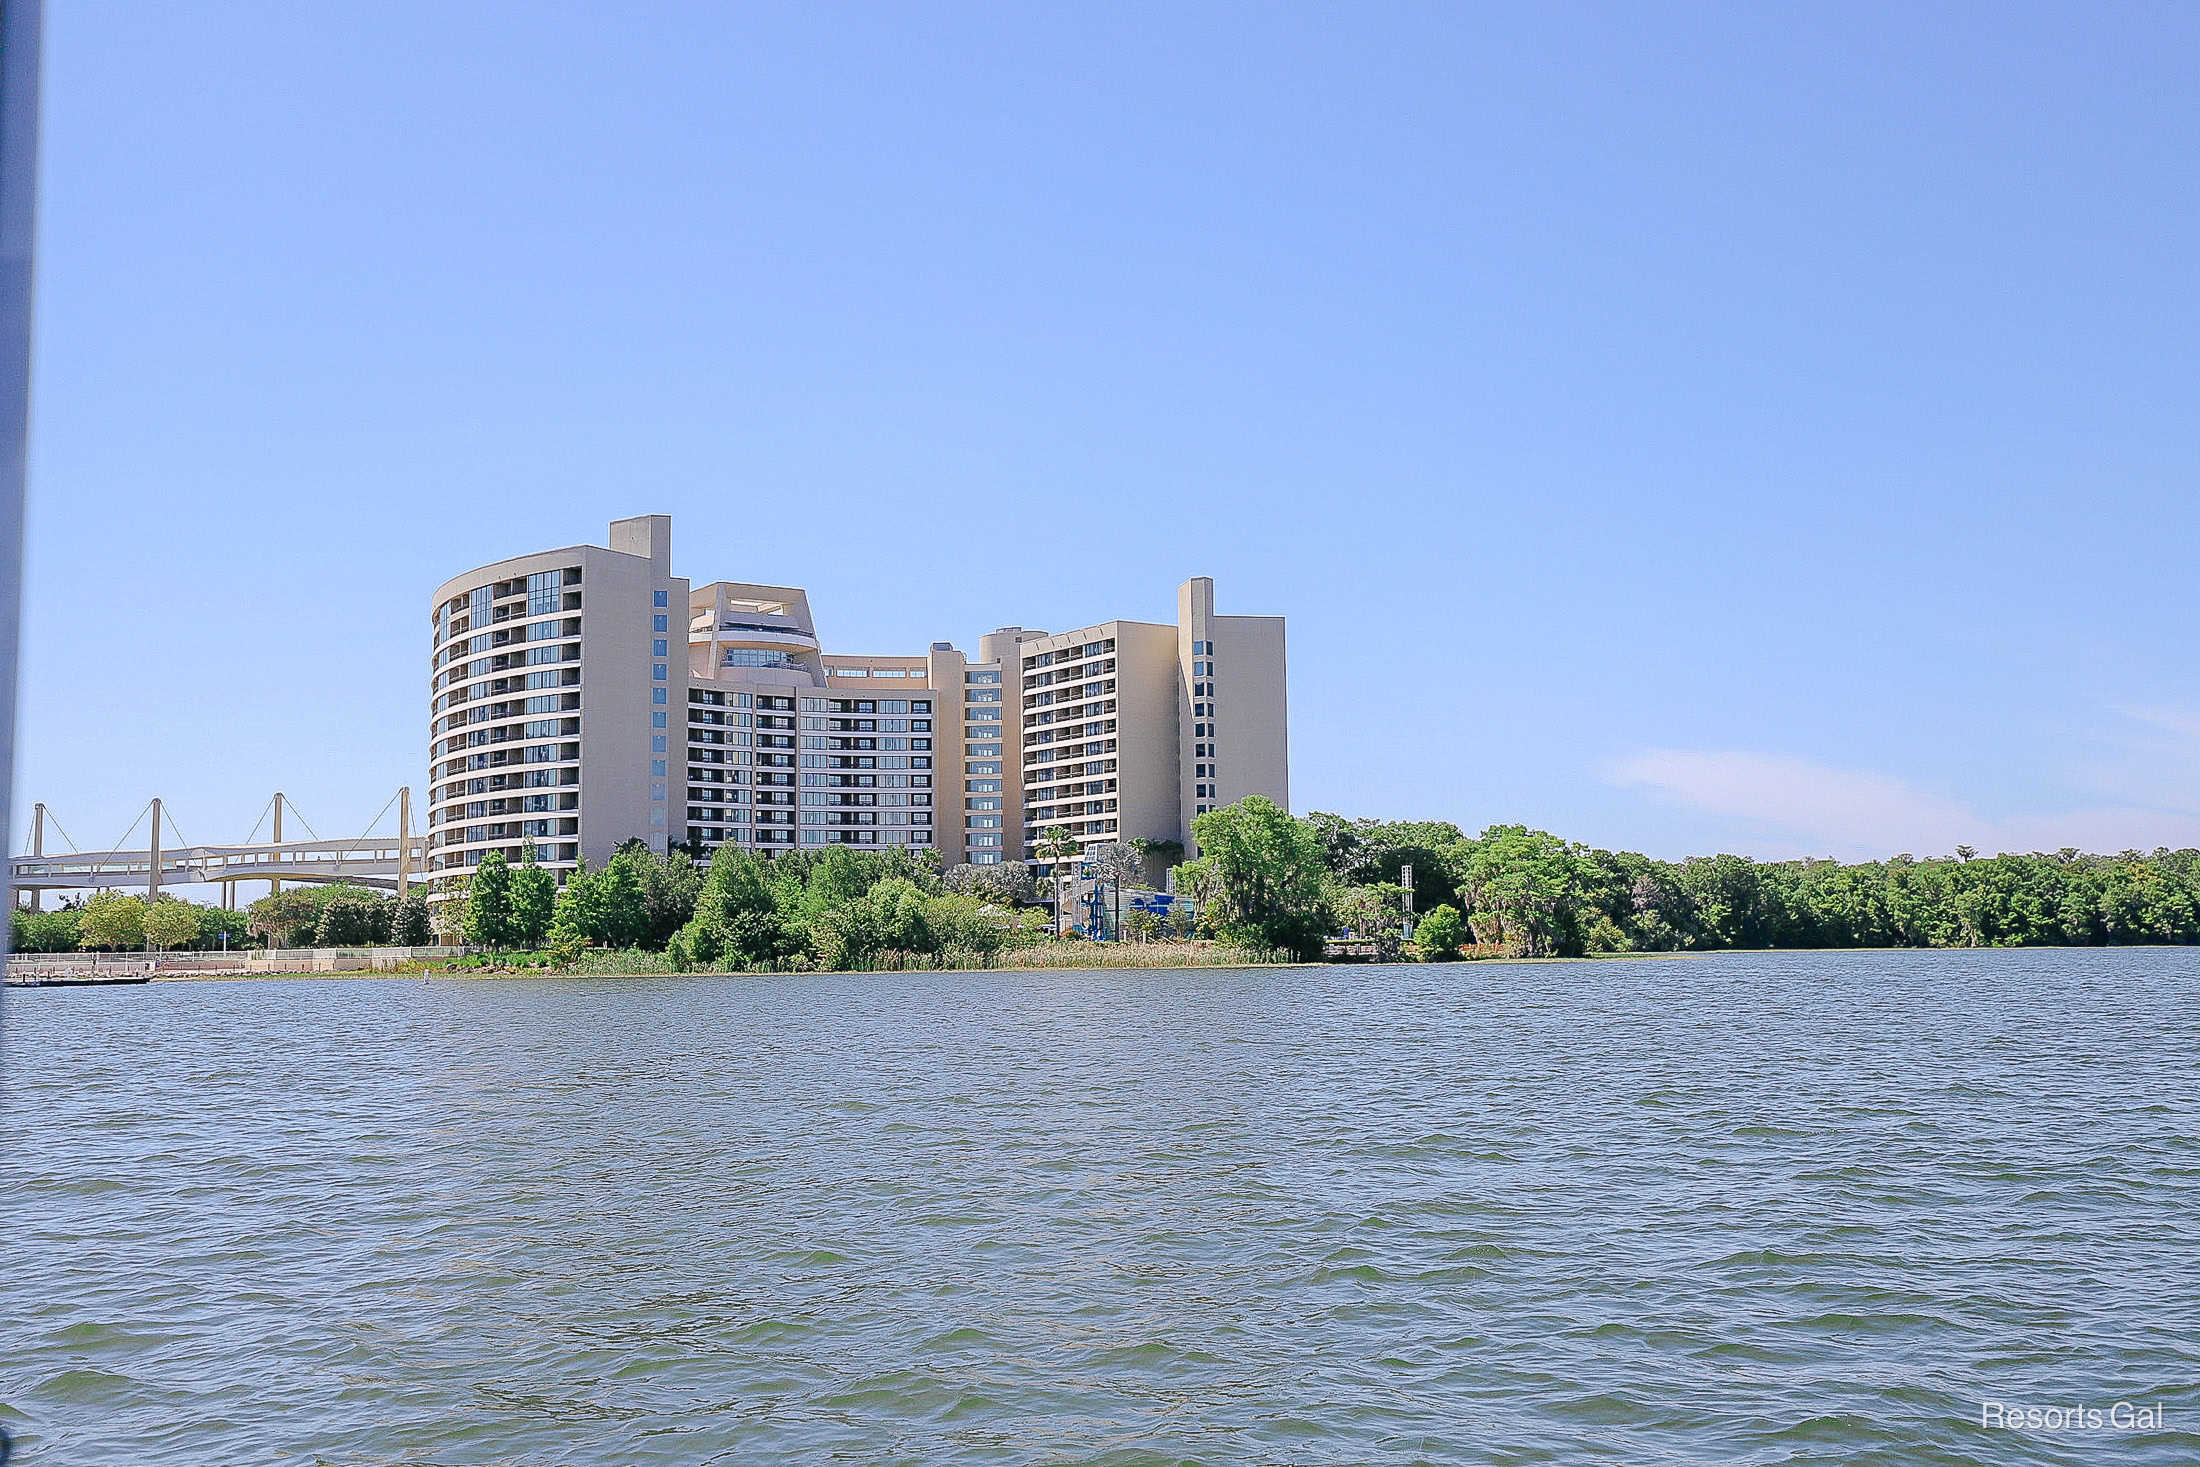 Bay Lake Tower Resort as seen from the lake, a resort based on category, price, and location 